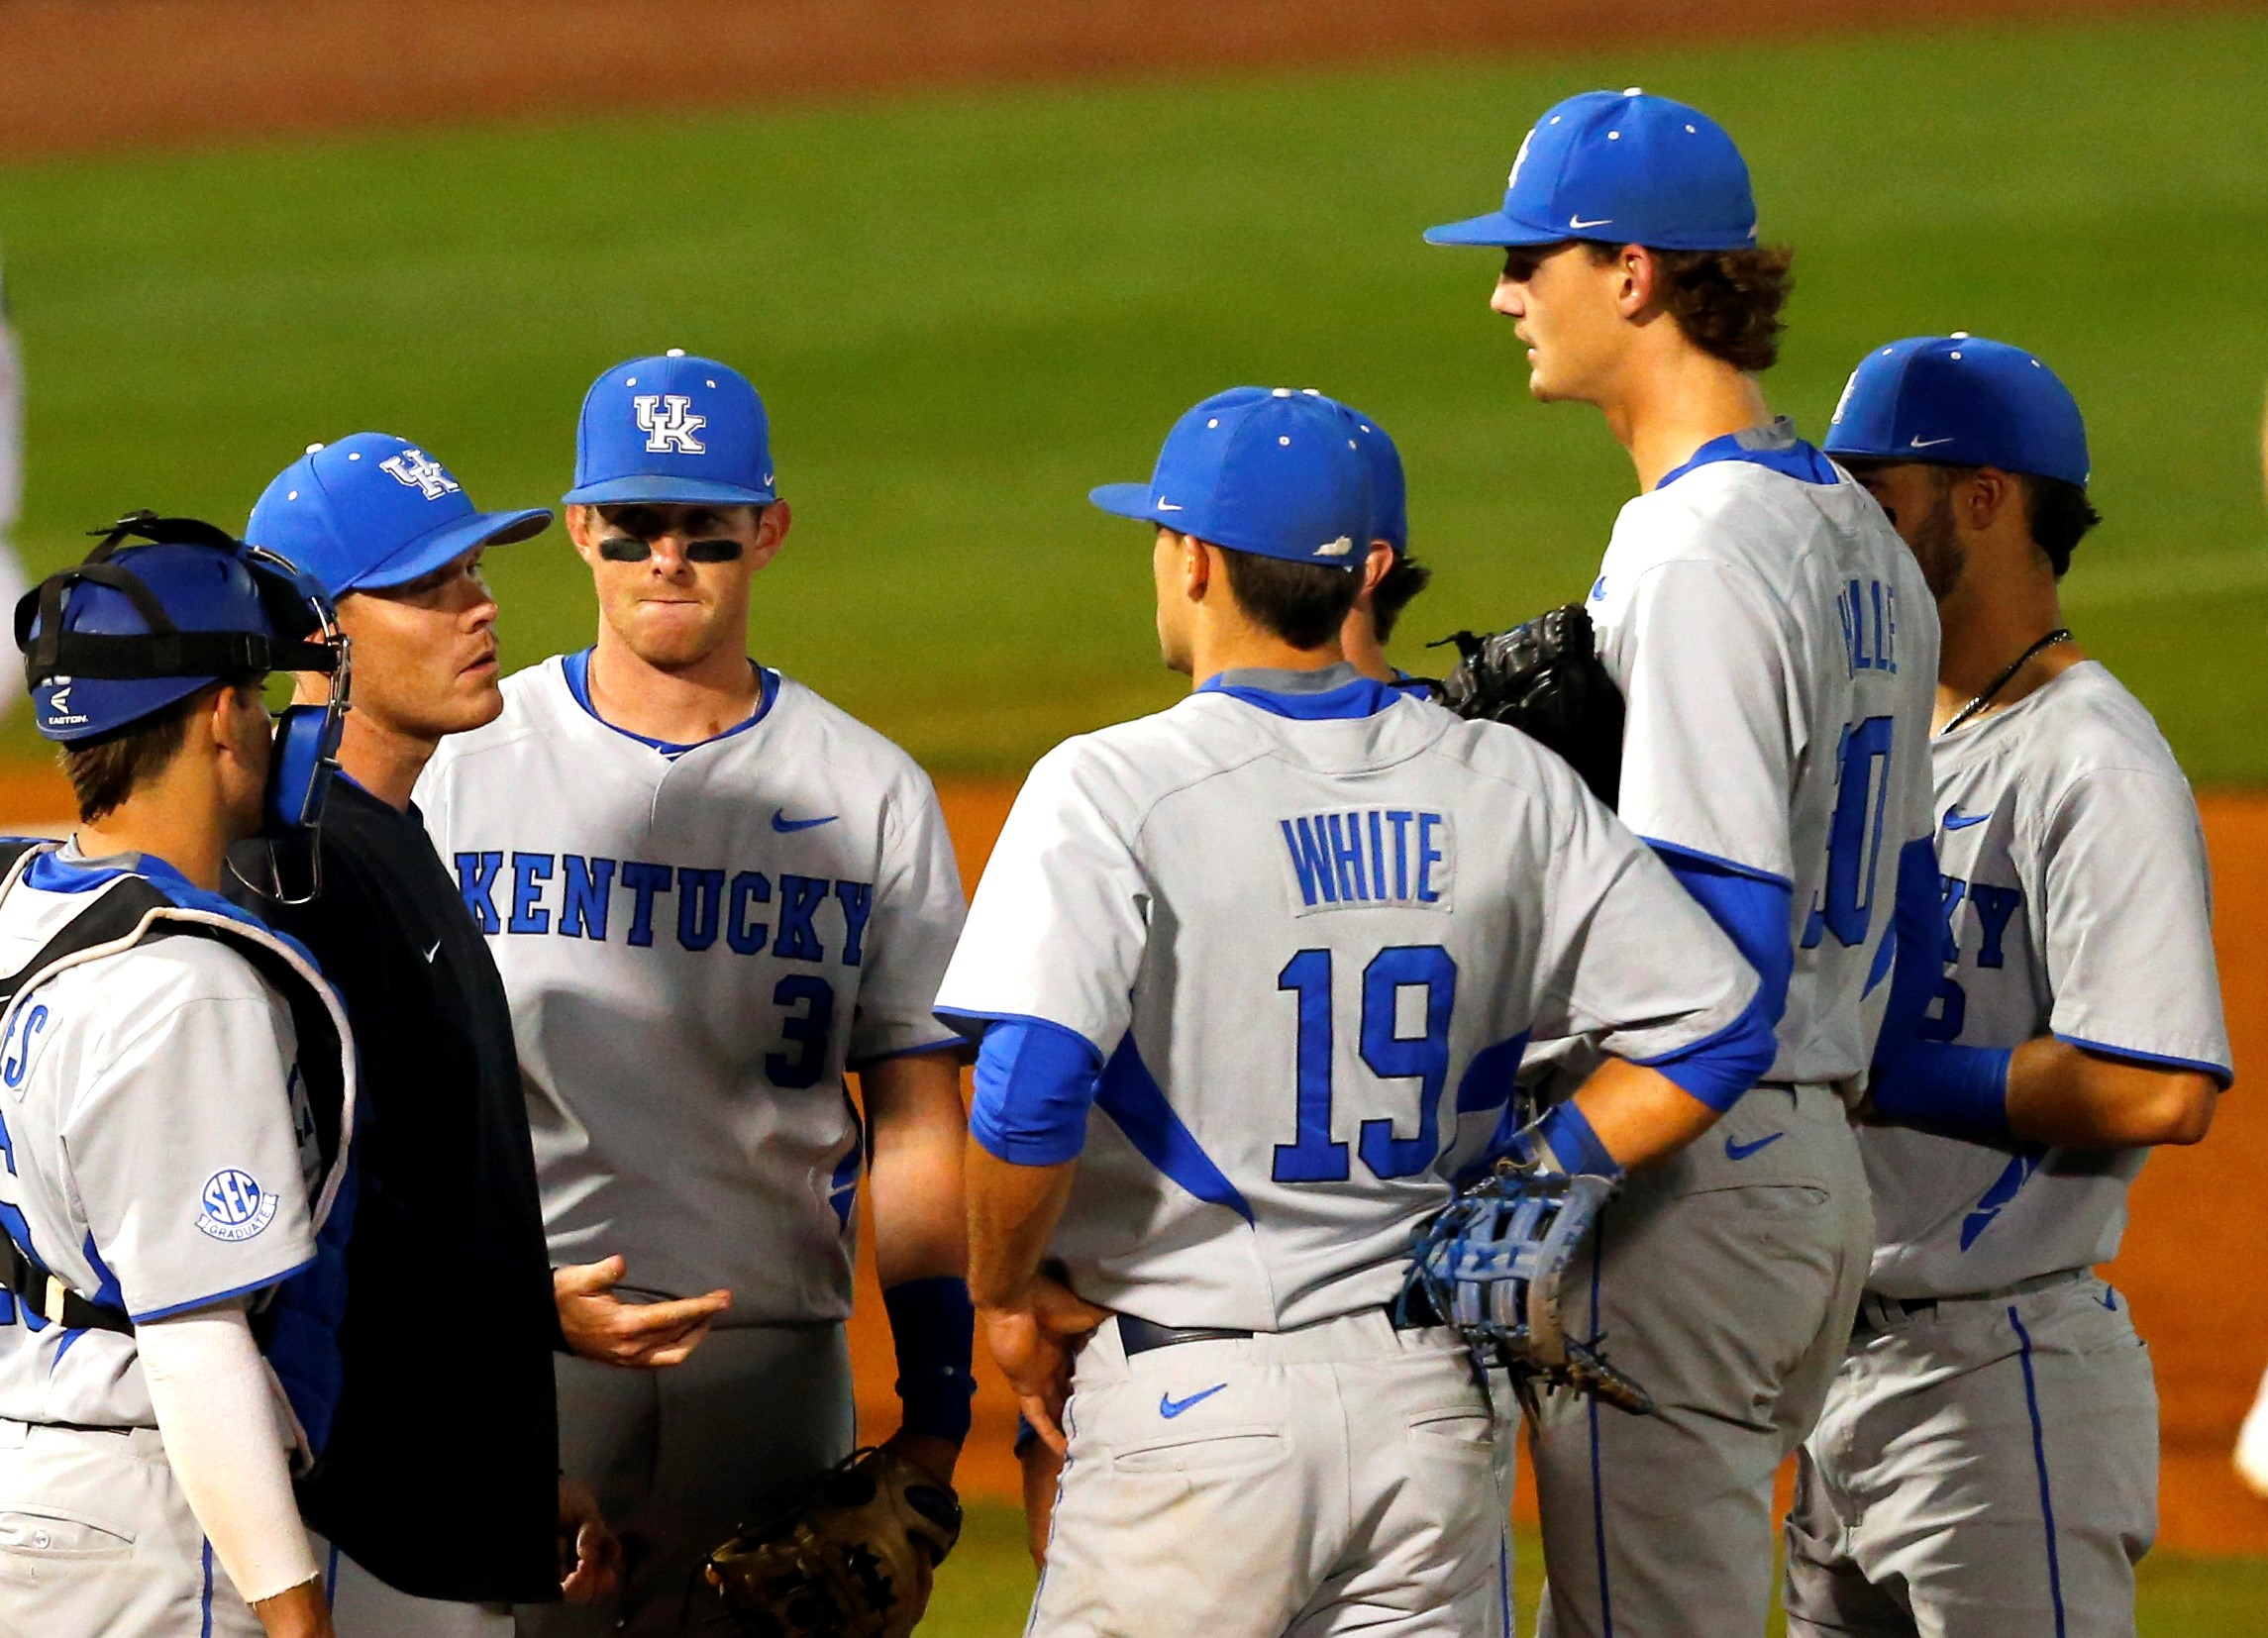 Early Deficit Proves Too Much For No. 8 Kentucky to Overcome